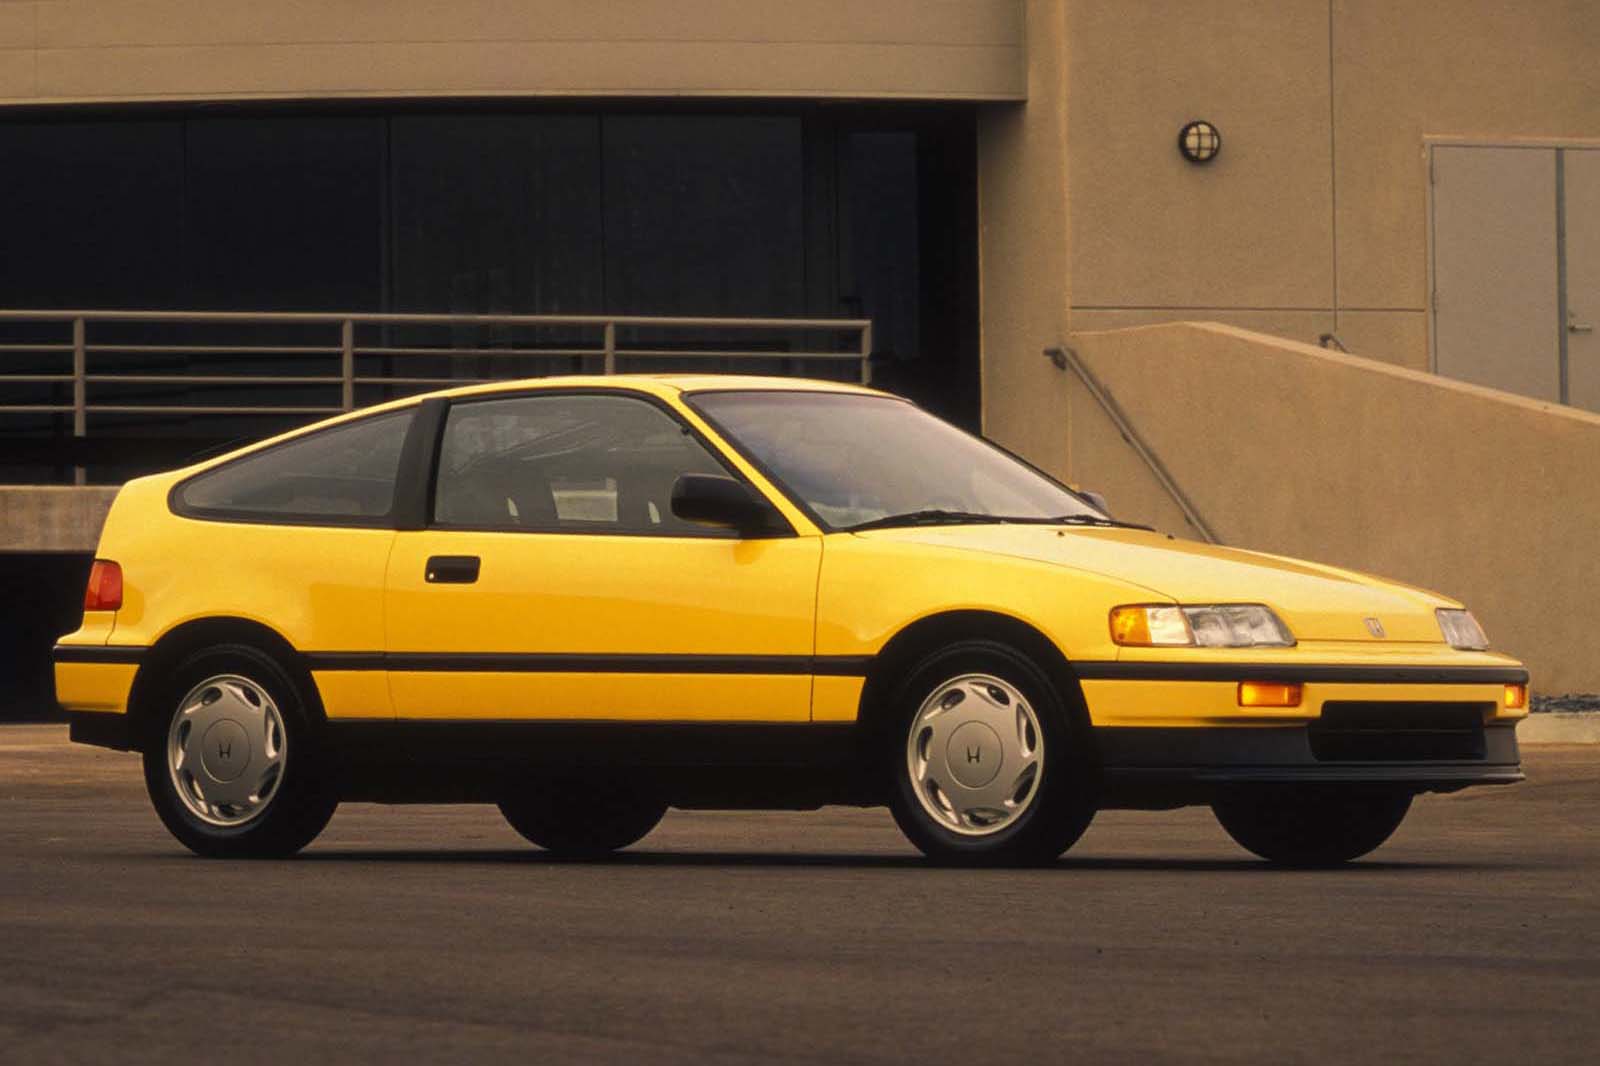 The Si model of the CRX had the same 91-hp 1.5L engine as the regular Civic, and that was plenty. HF versions prioritized fuel-sipping behaviour over all else, but still managed to be fun to chuck around. However, the Si version was where it was at.